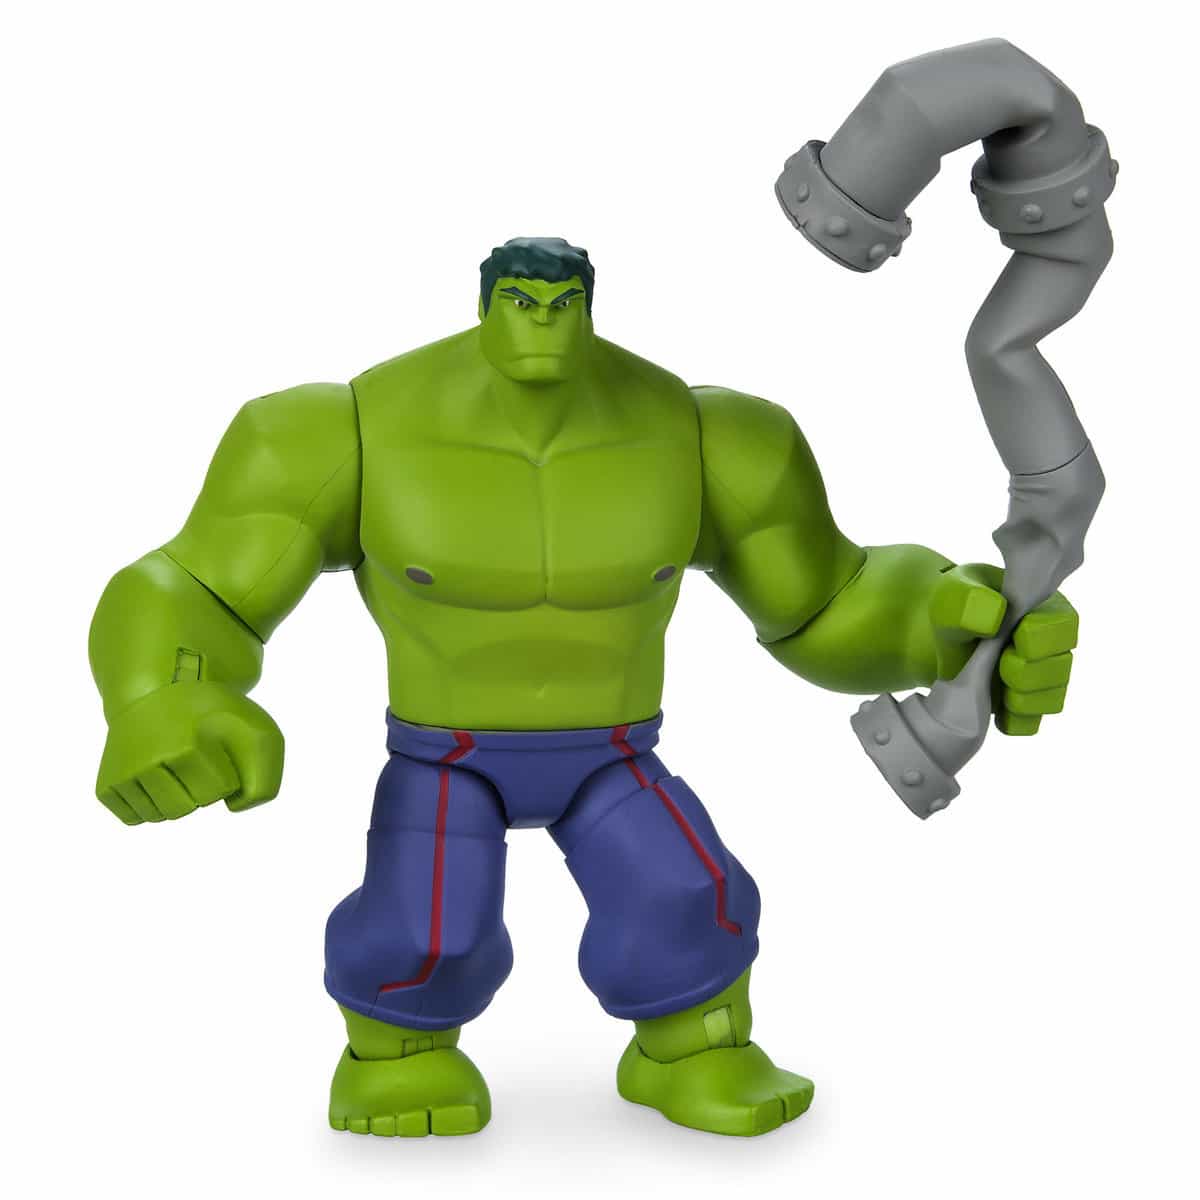 disney-infinity-style-marvel-toybox-action-figures-out-now-diskingdom